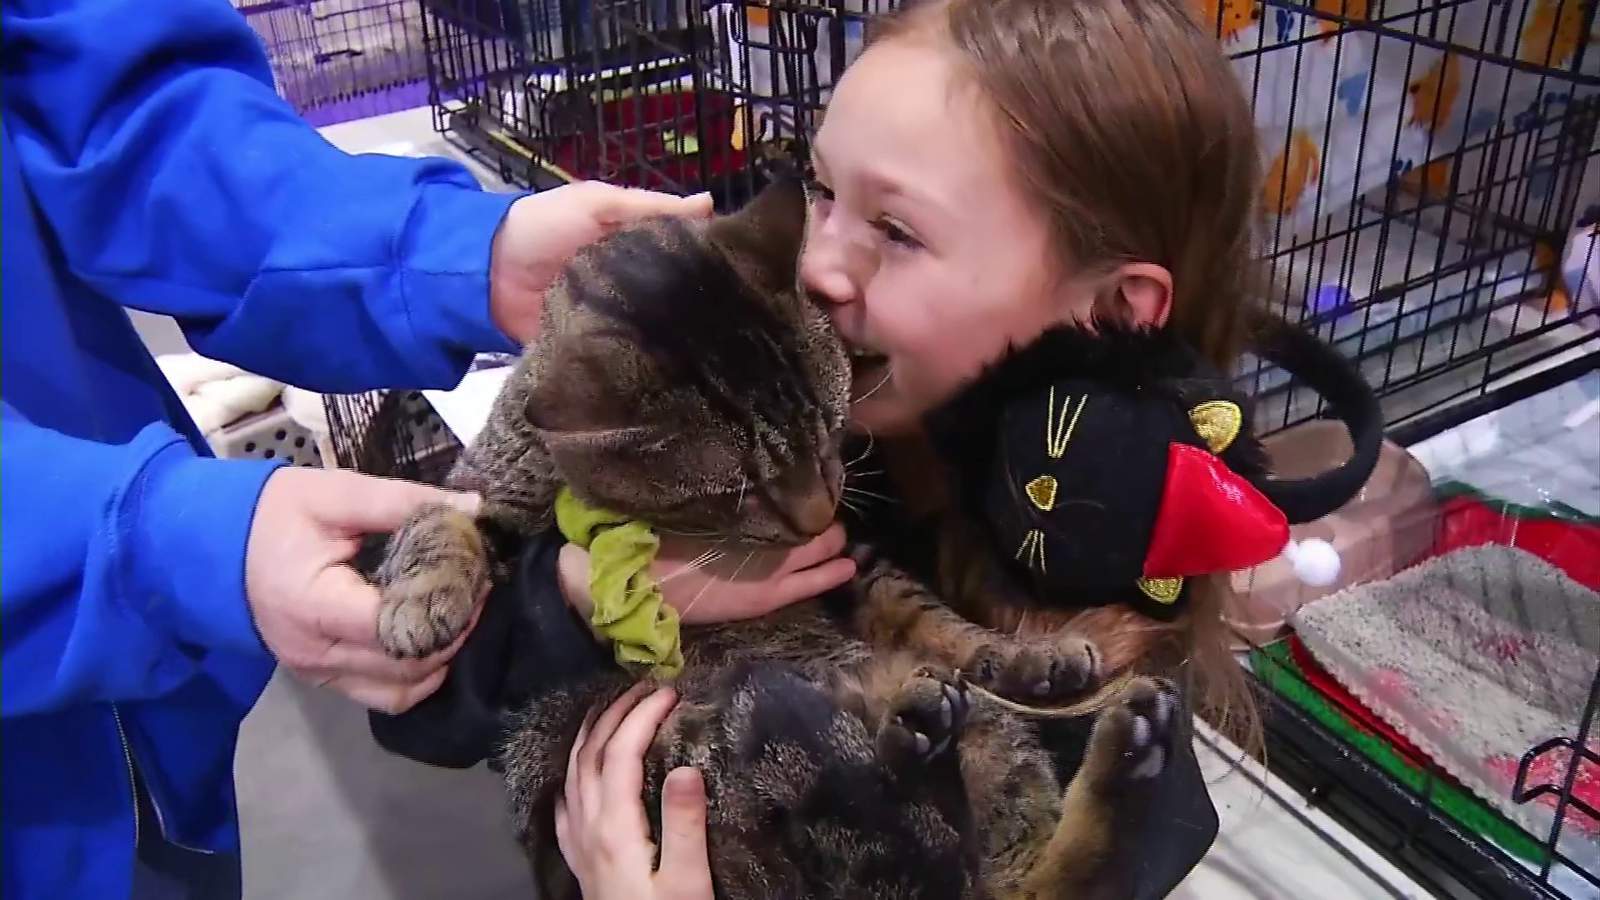 “We were looking for someone who needed us”: Pets find new homes at mass adoption event